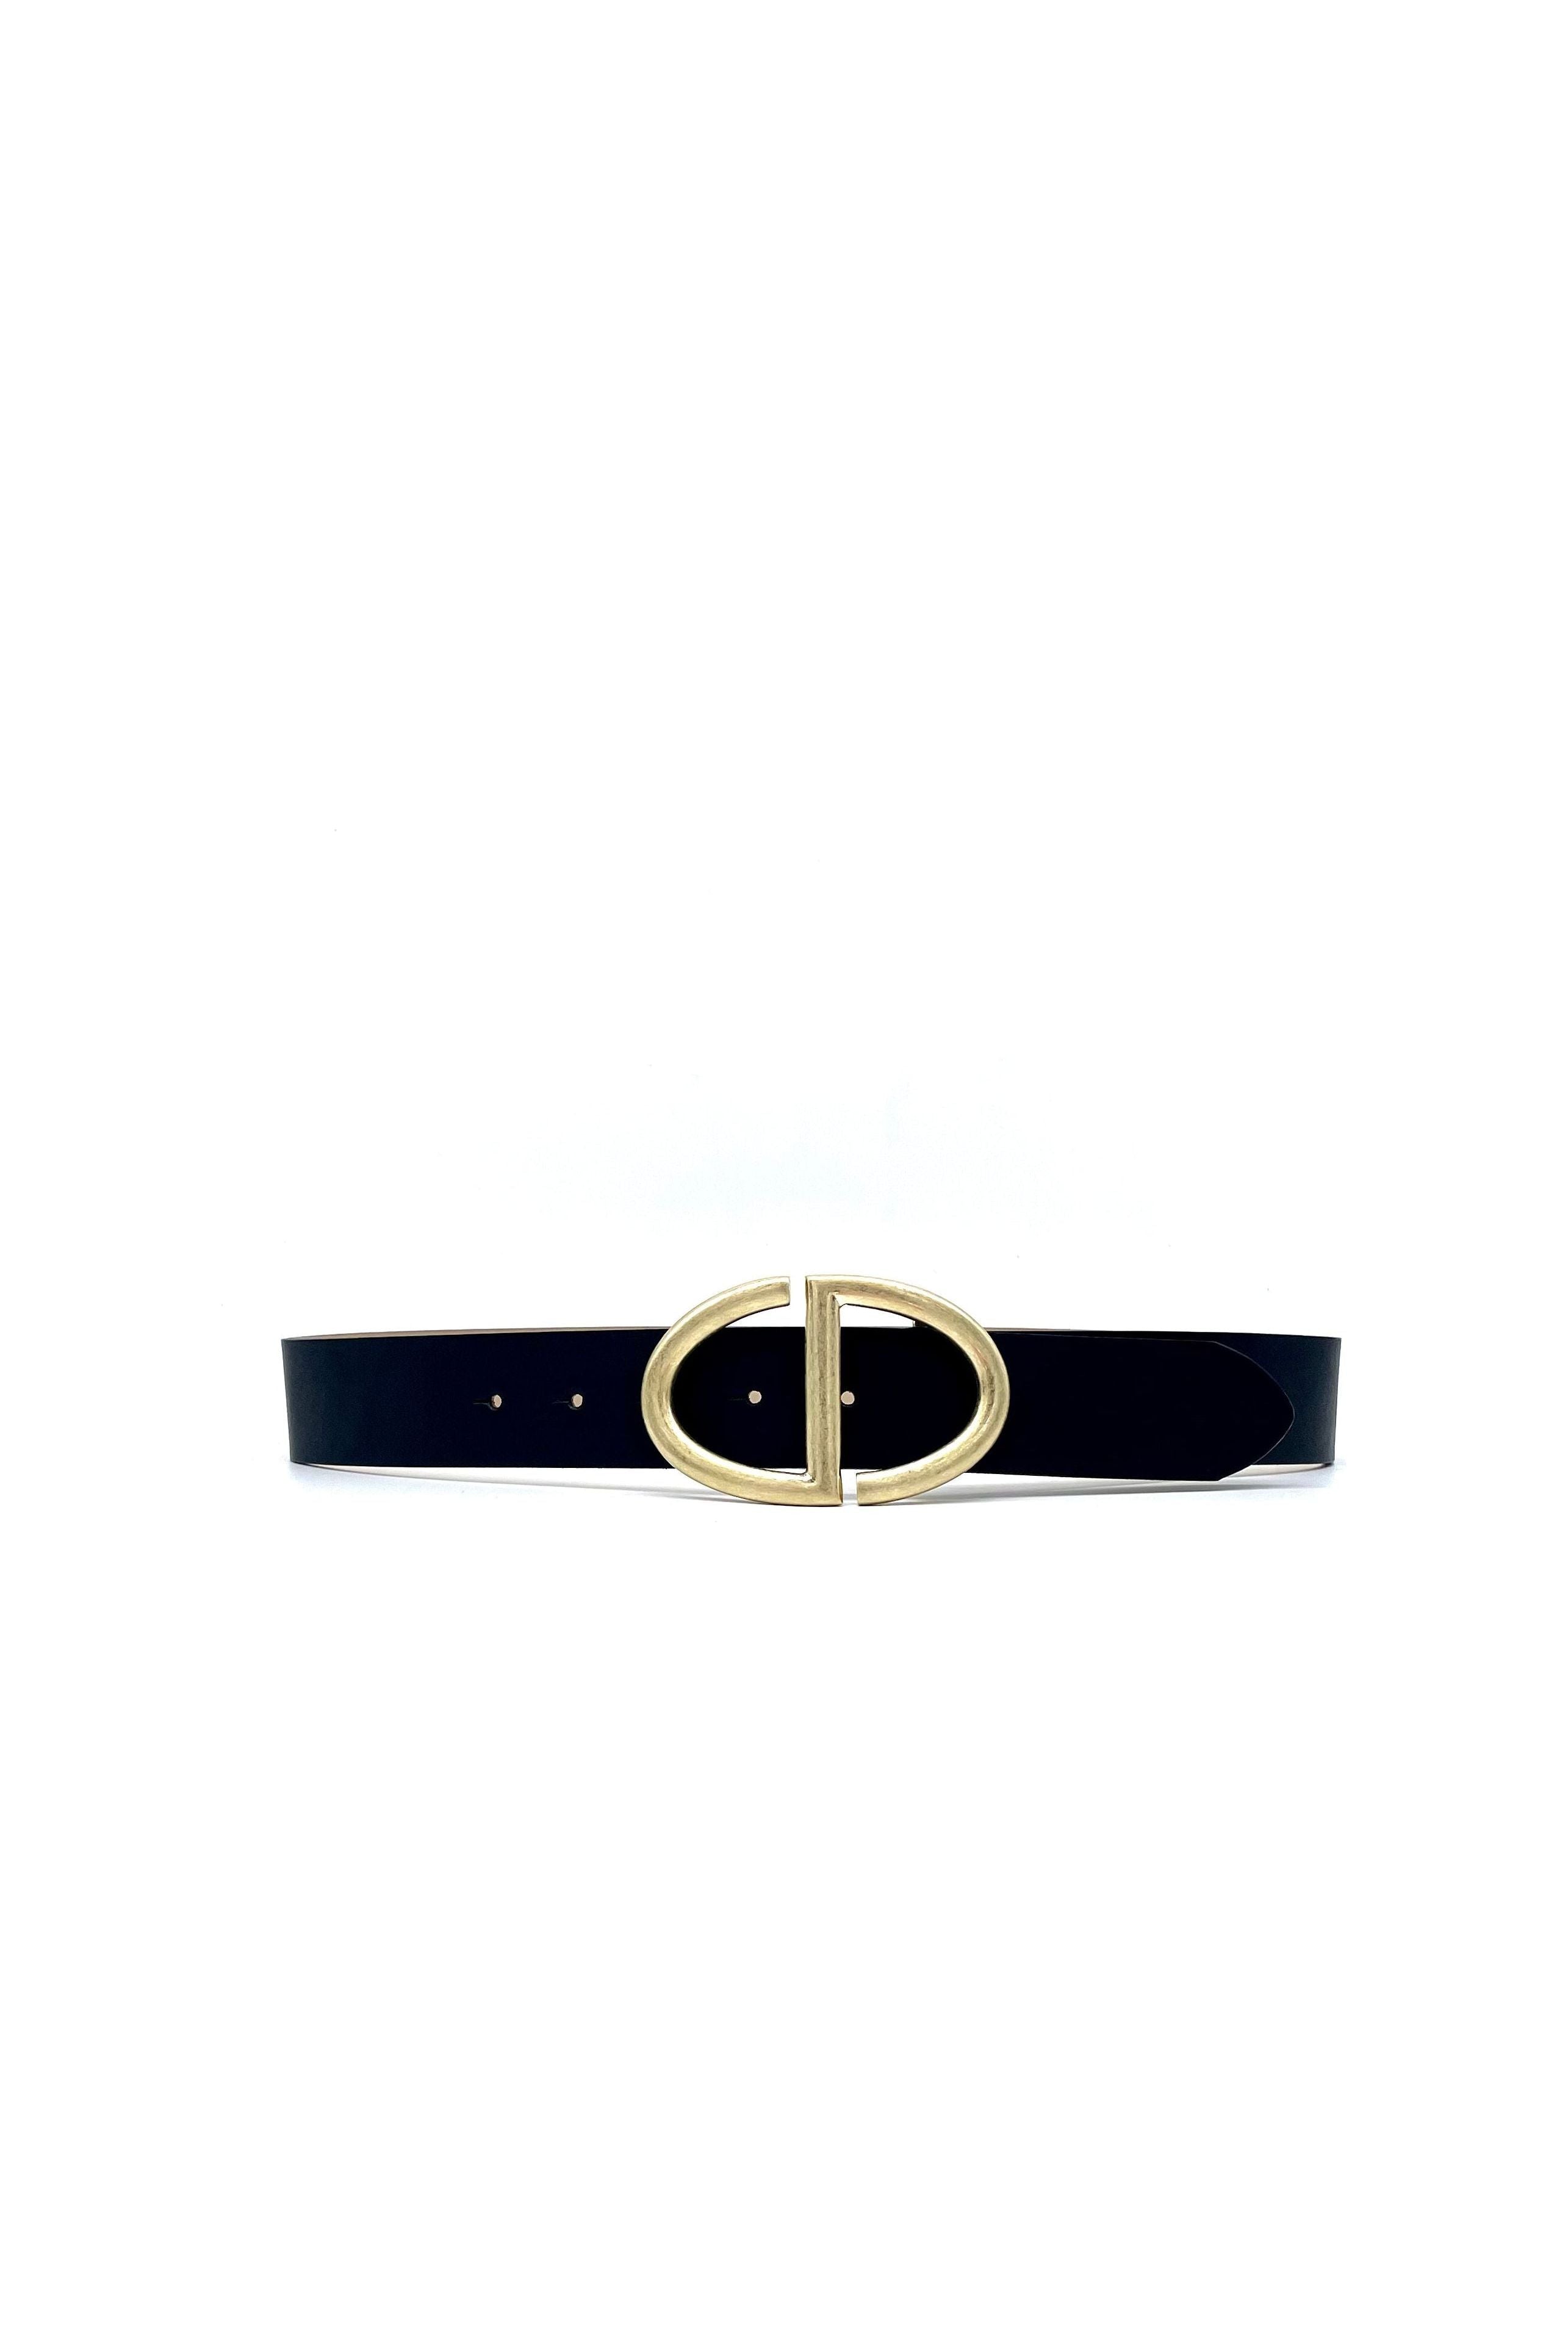 Streets Ahead Scarlet 1.5 inch Leather Belt 23021 | Black/Gold Buckle Black/Gold Buckle / x Small